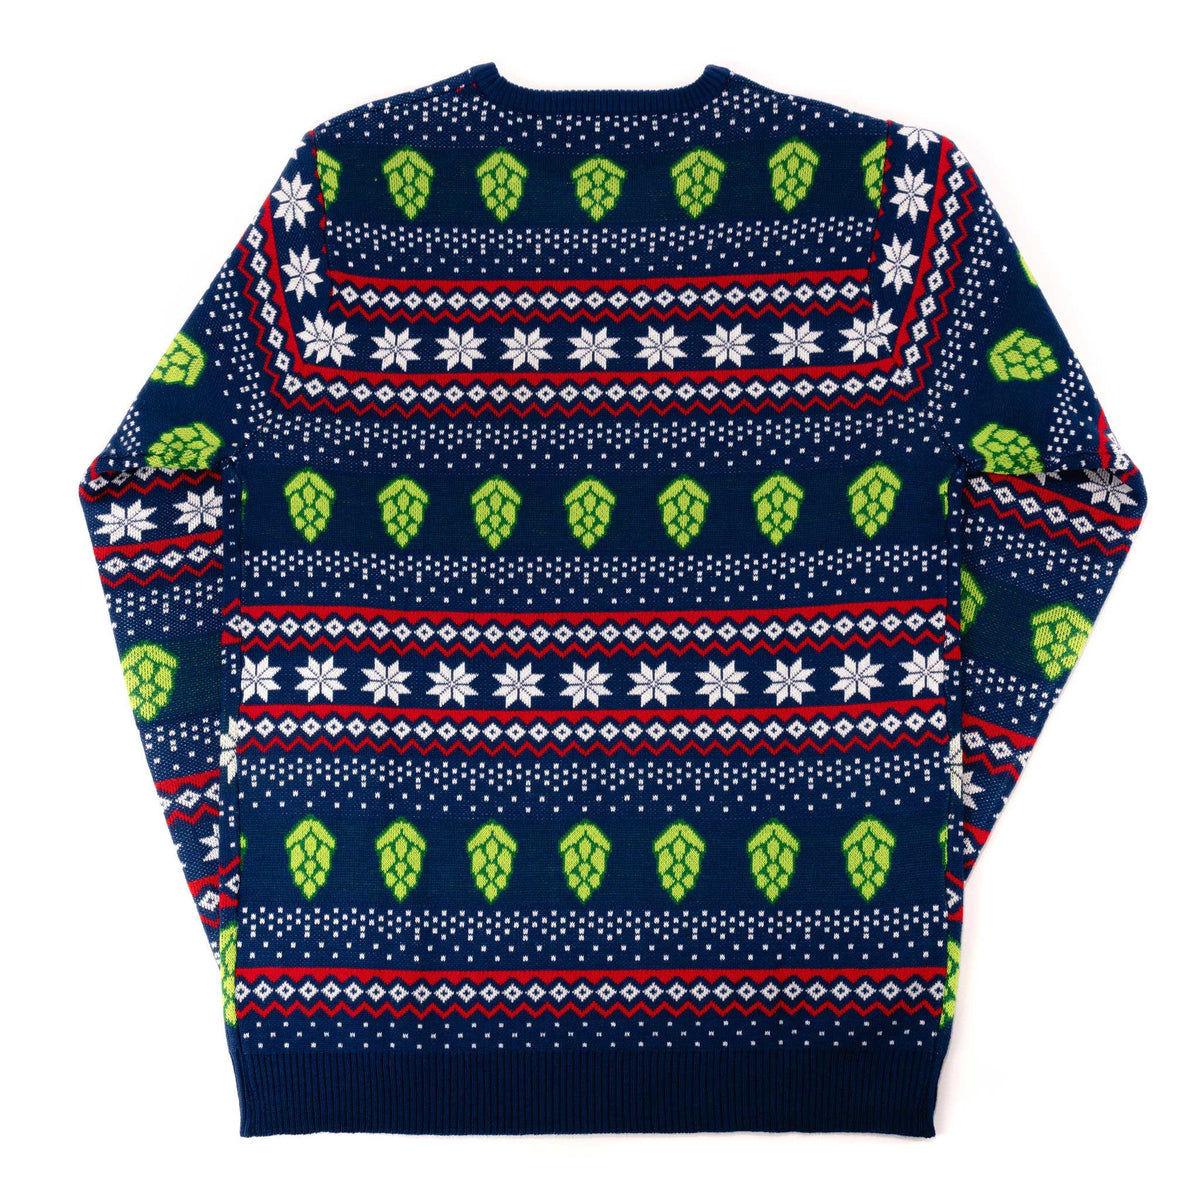 Back view of Sierra Nevada holiday knit sweater with hop pattern